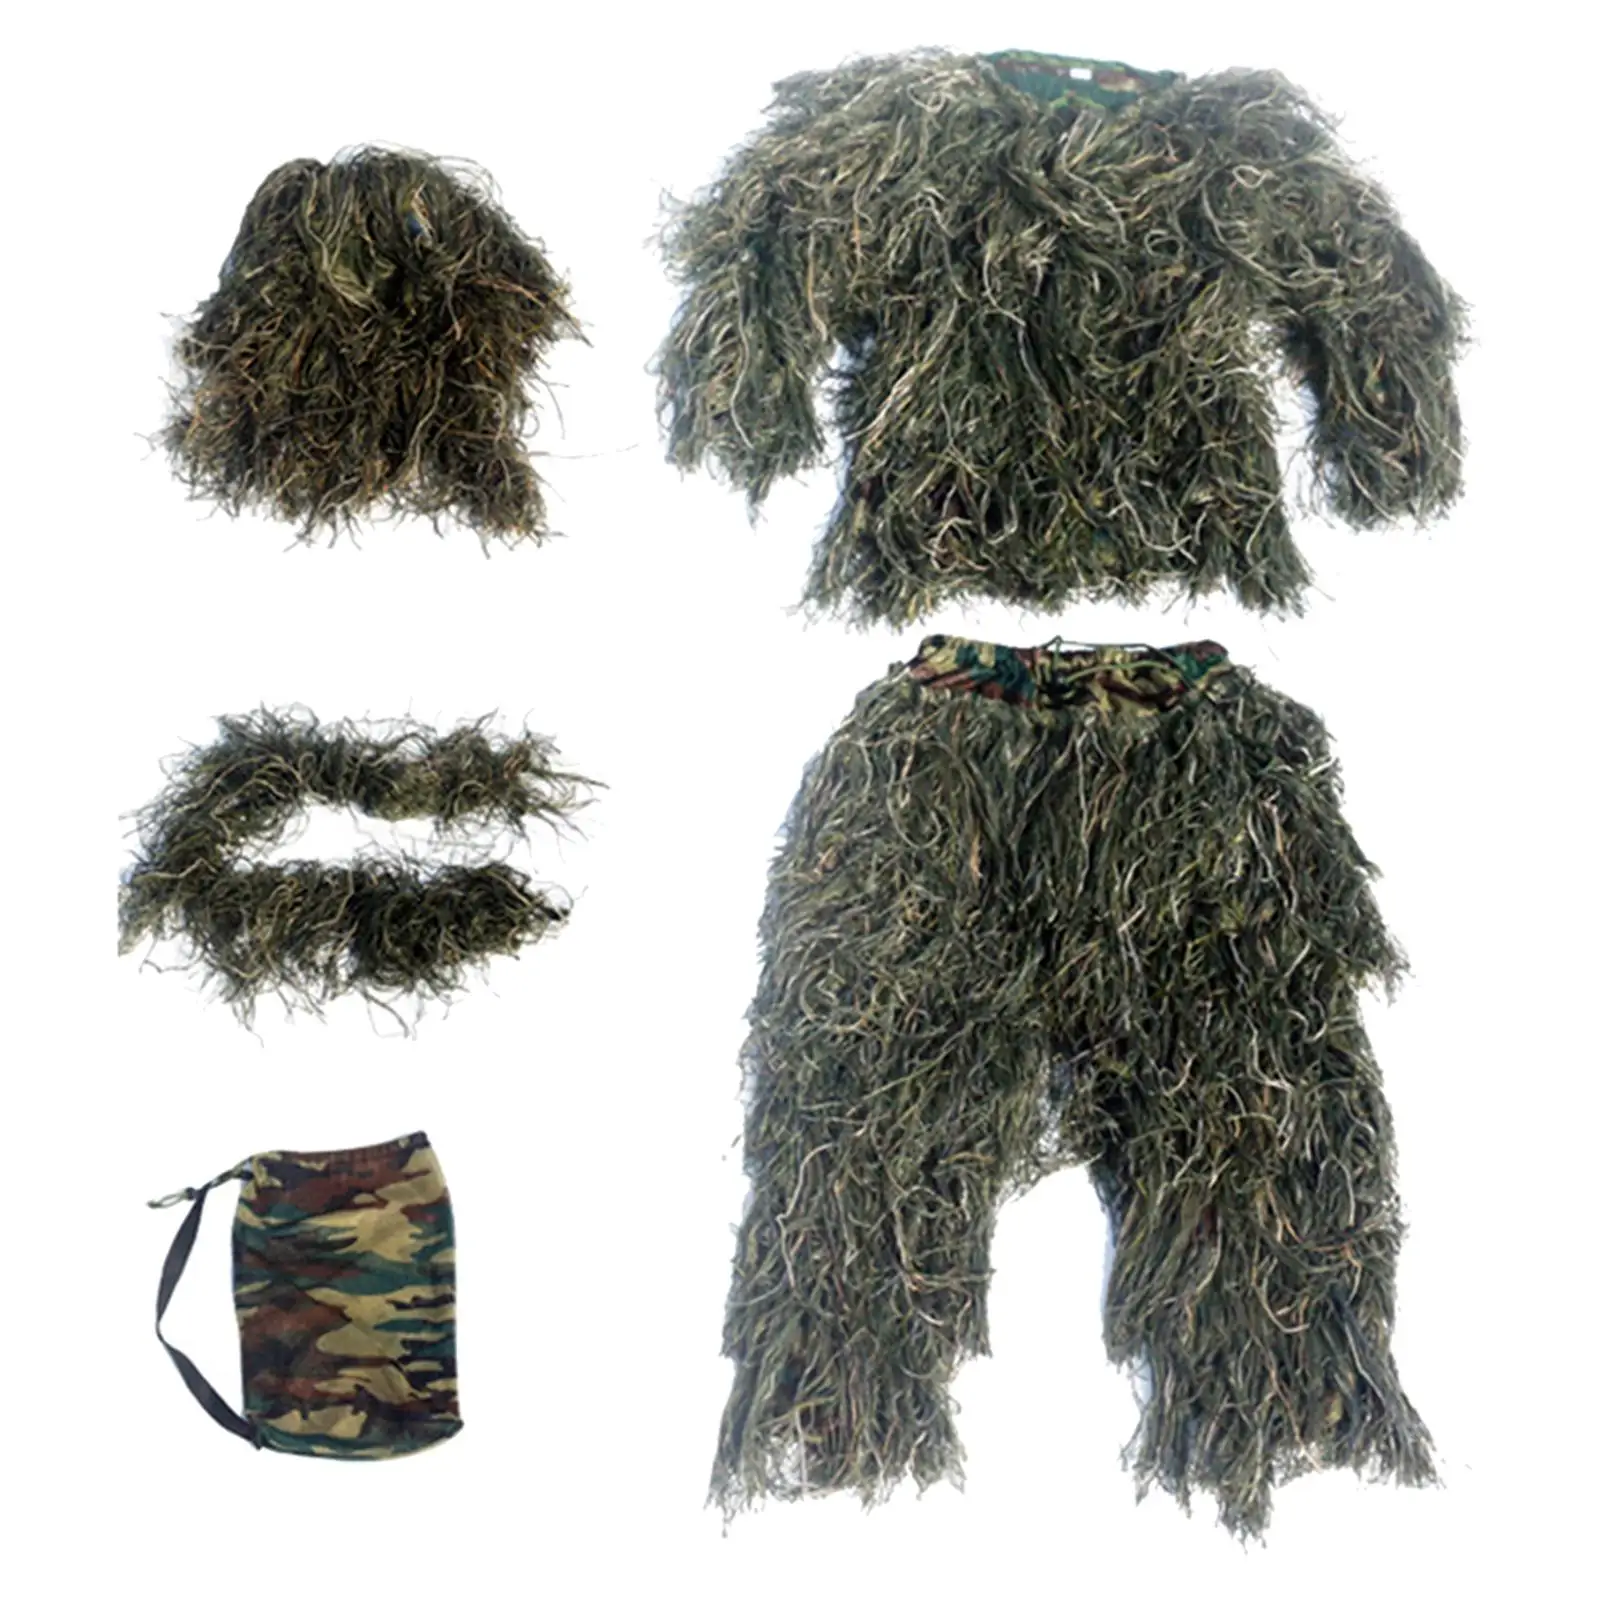 Ghillie Suit Breathable with Storage Bag for Turkey Hunting Outdoor Party